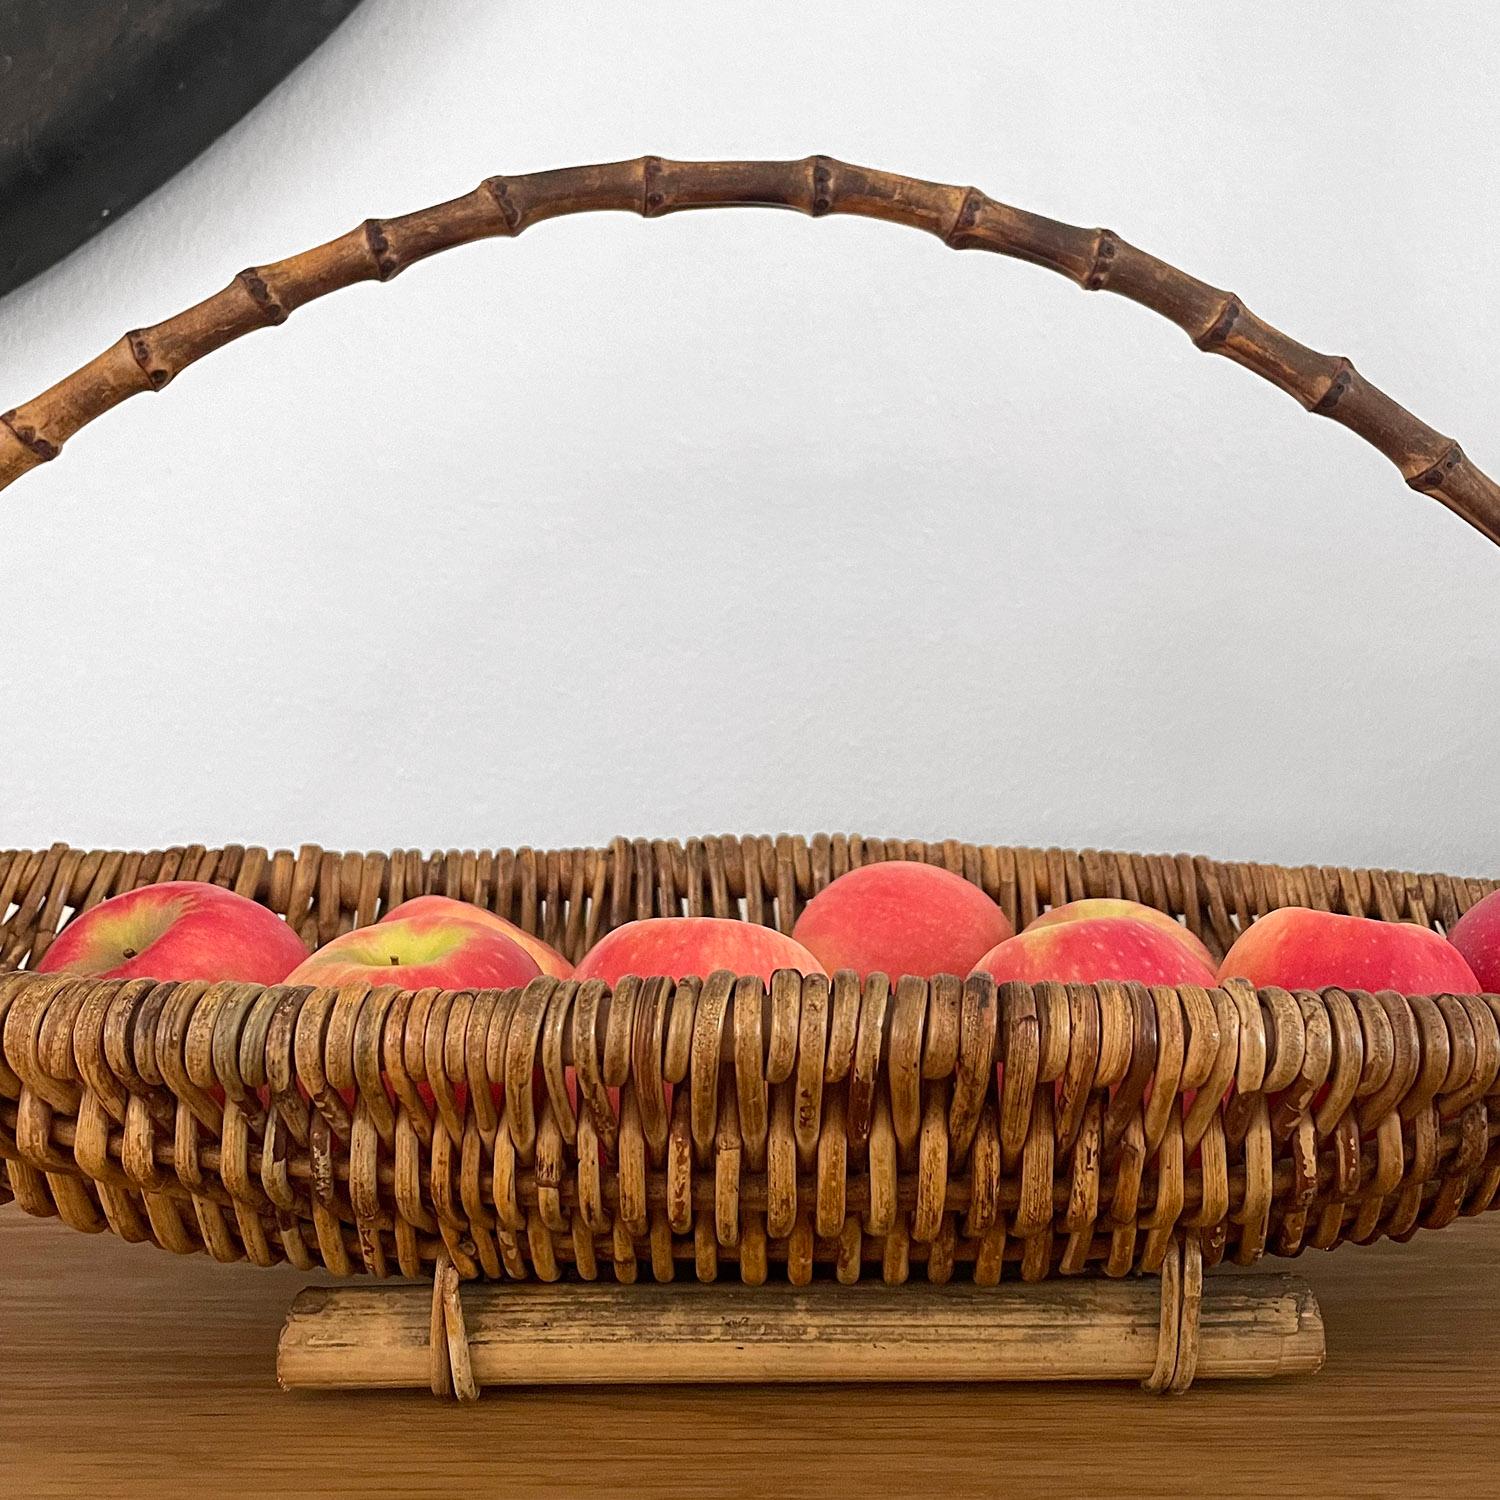 20th Century French Wicker & Bamboo Fruit Basket